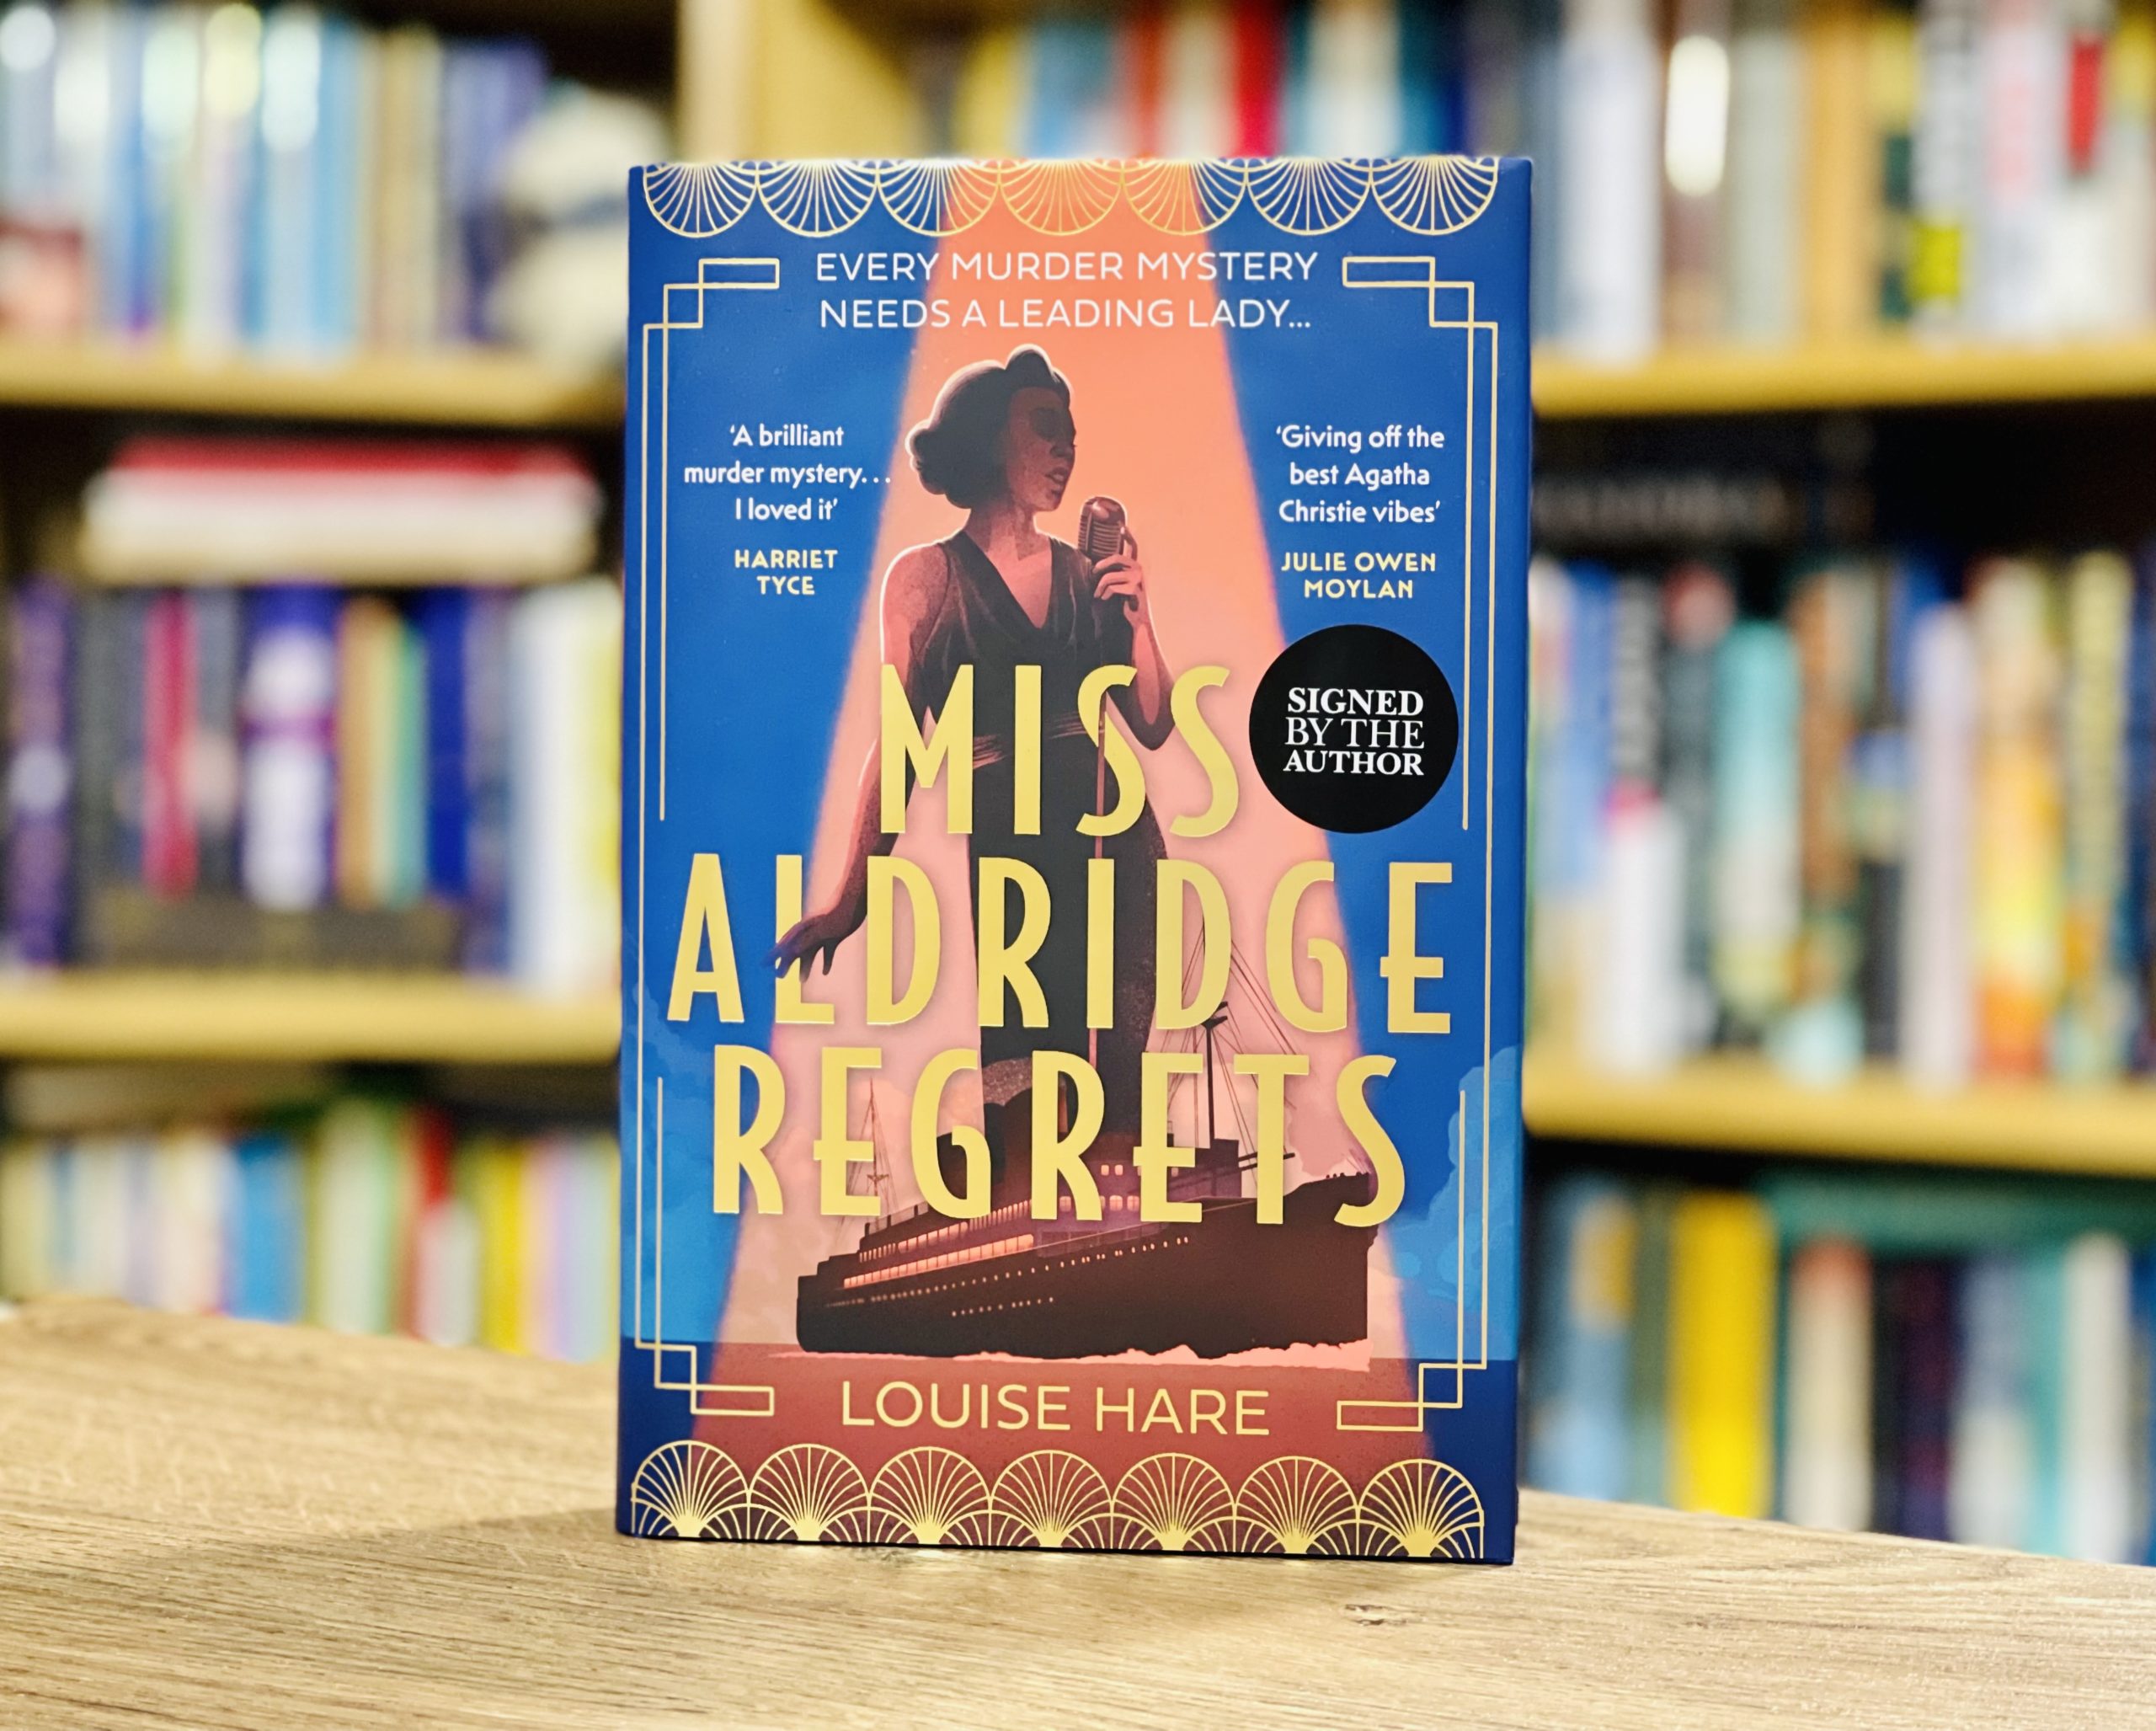 Miss Aldridge Regrets with author Louise Hare (Readers and Writers